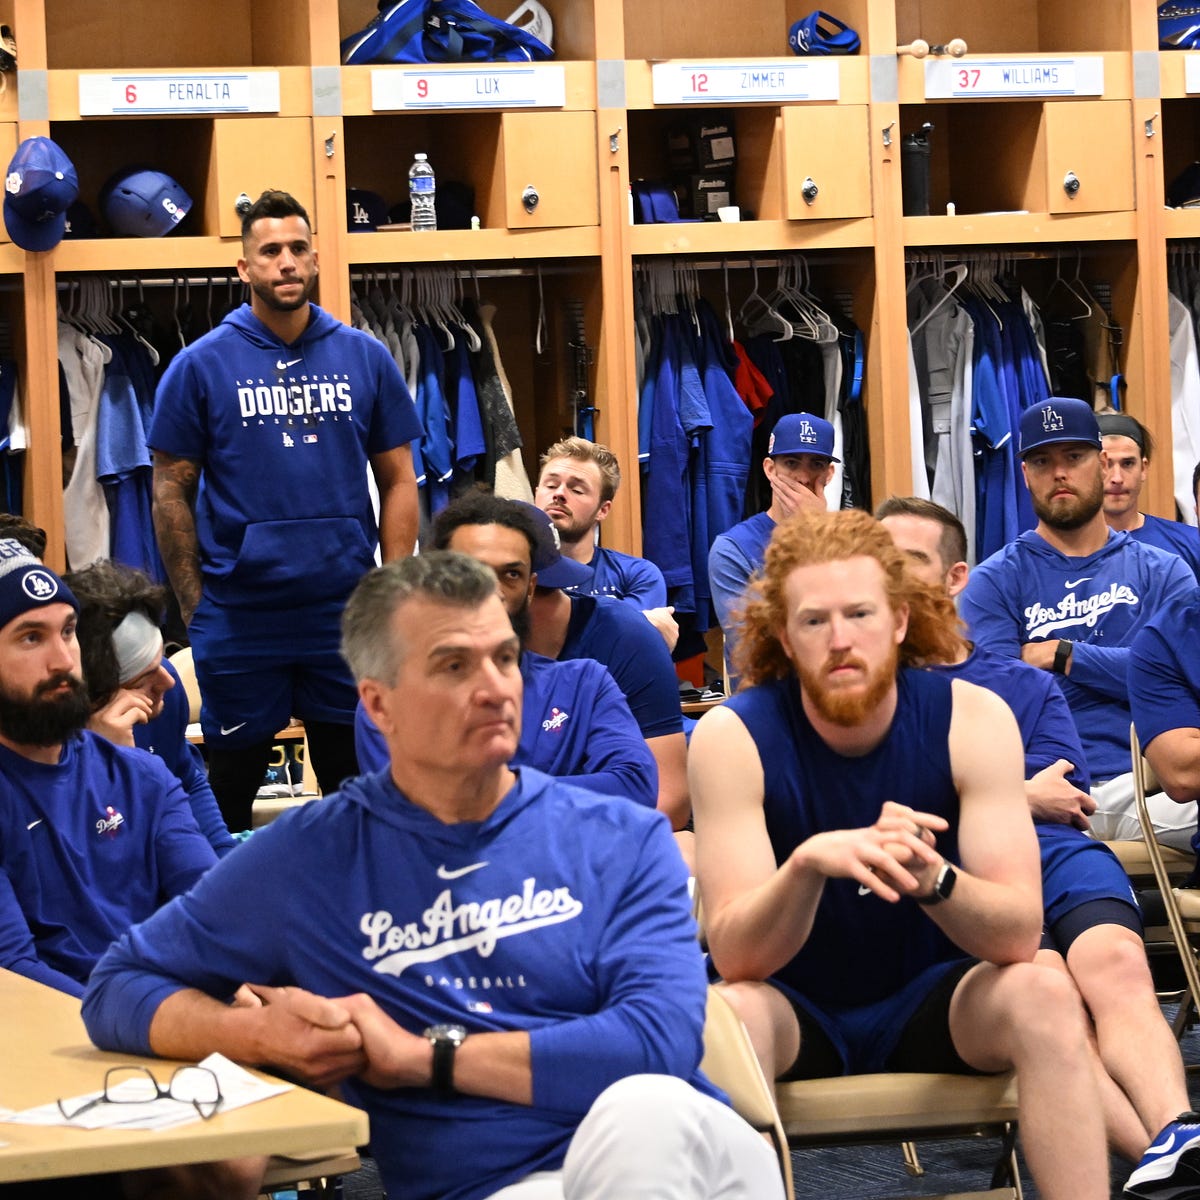 New Dodgers are part of the introductory message at Spring Training camp, by Cary Osborne